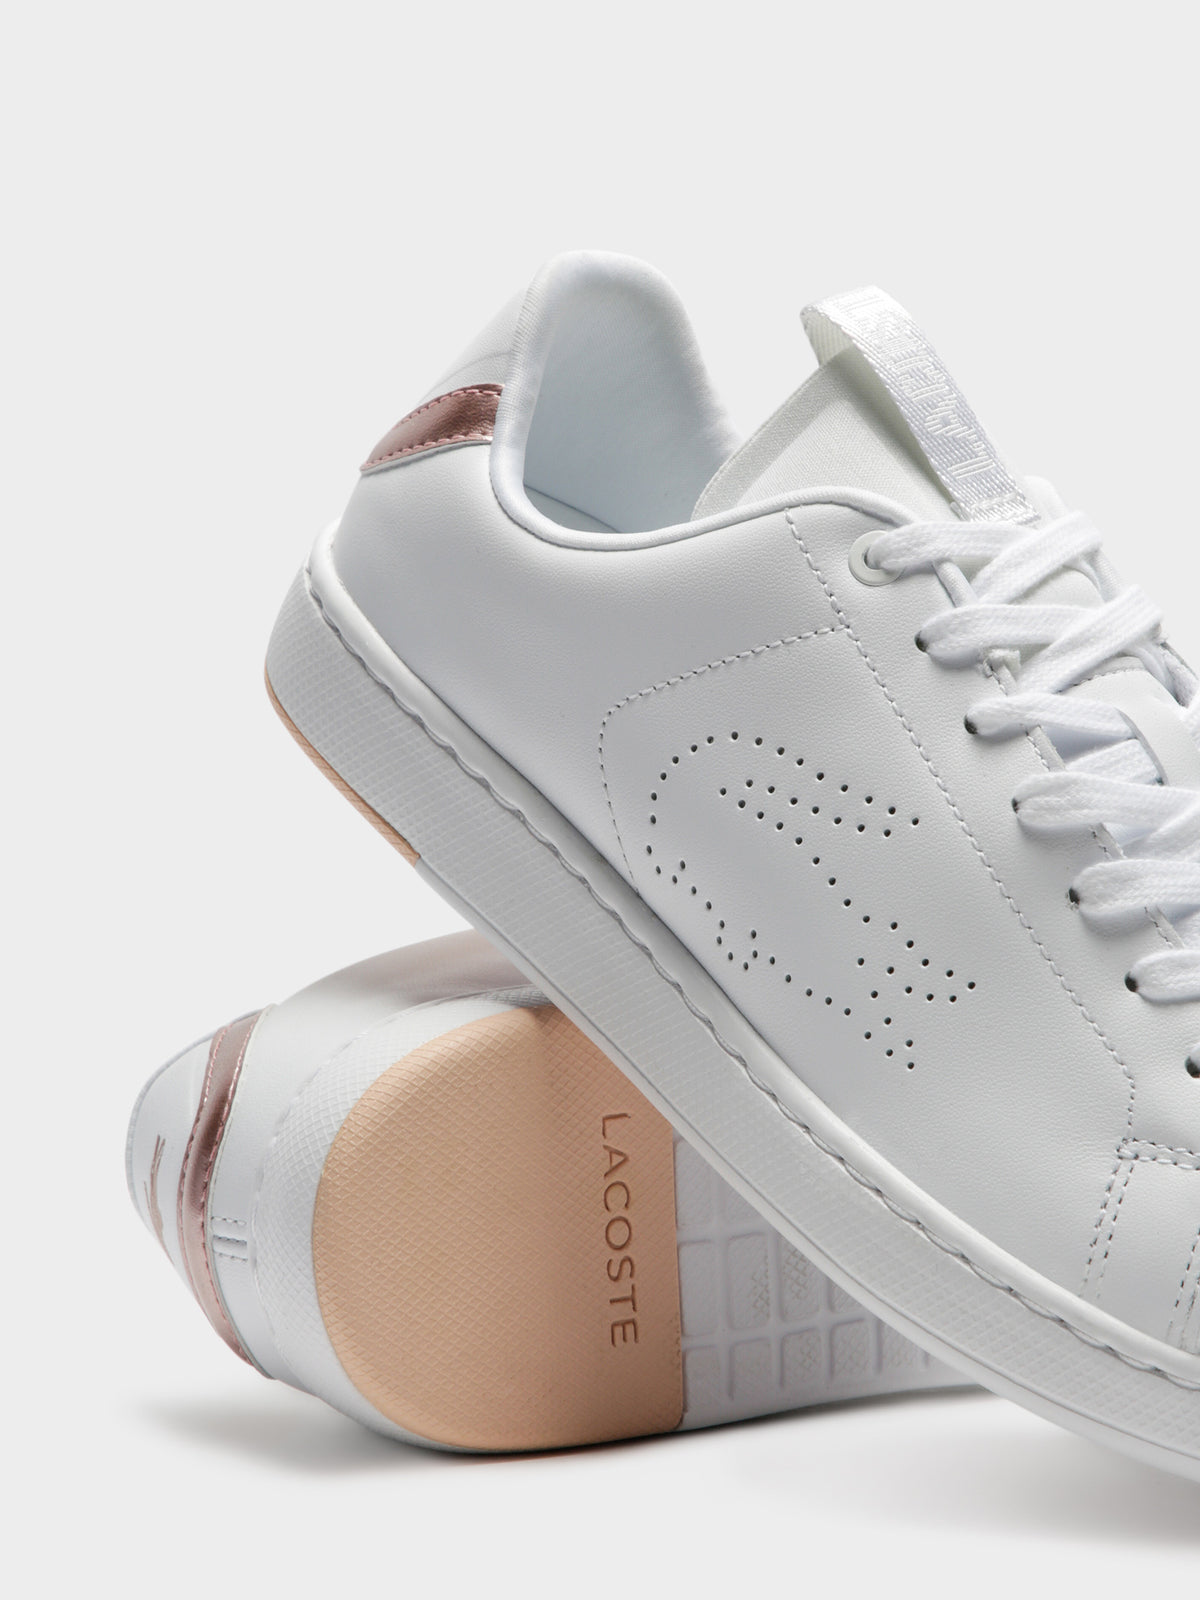 Womens Carnaby Evo 1193 Sneakers in White and Light Pink